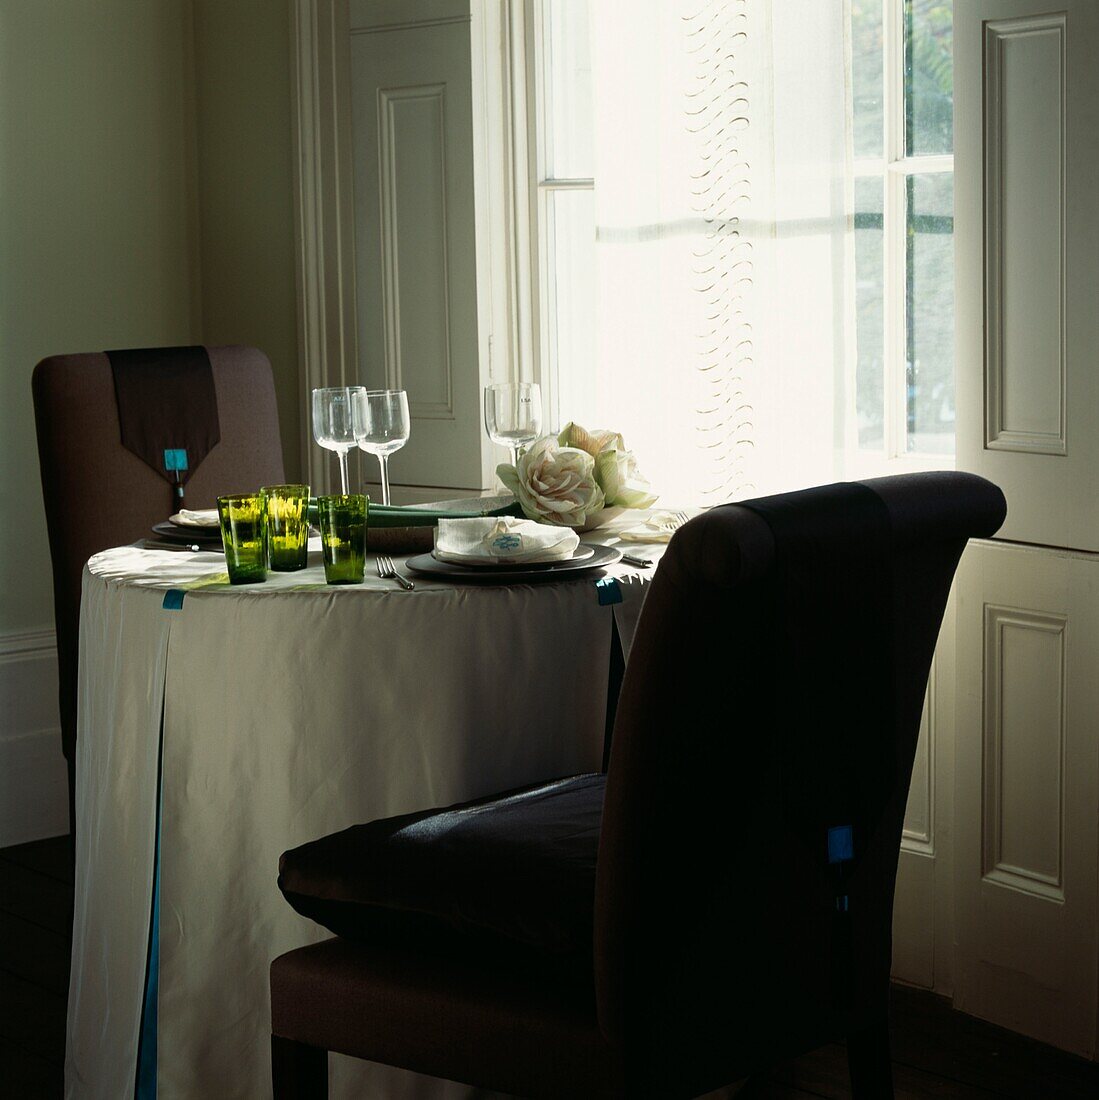 Dining room with large window and table setting for two